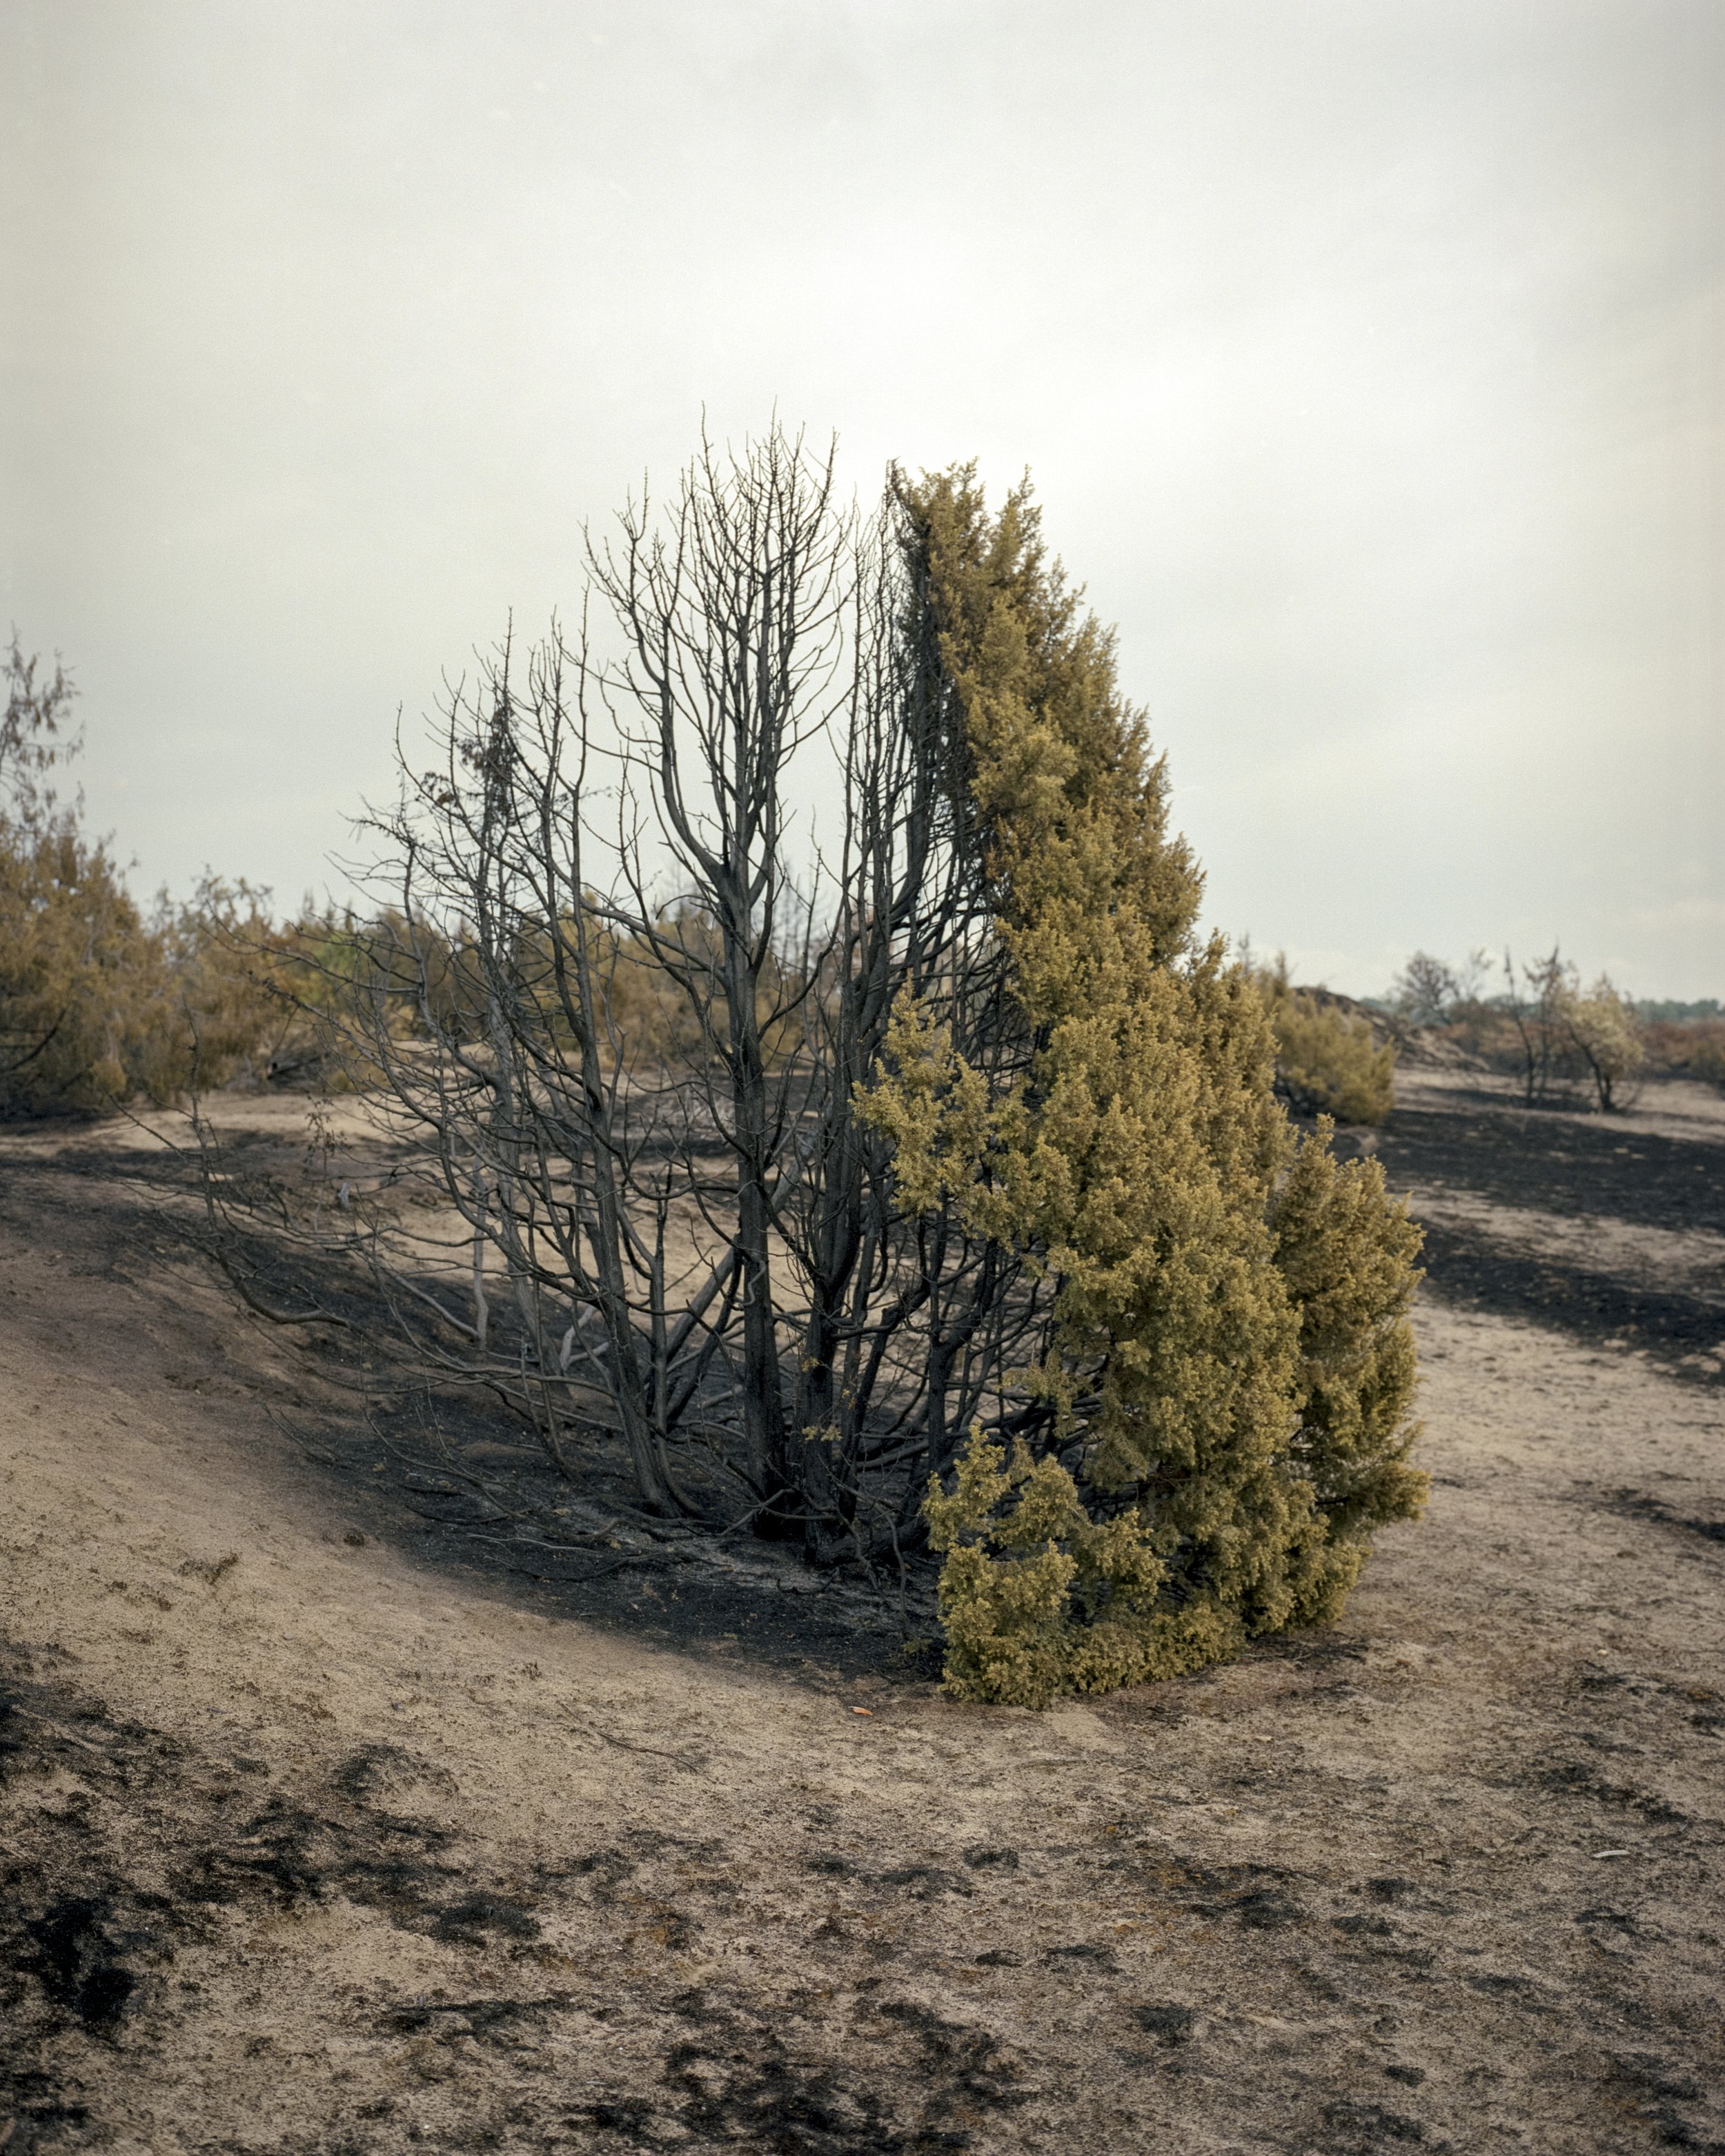  A half-burnt tree remained from the biggest forest fire of late summer. In total, around 2800 hectares of land were burnt. The damage to the natural environment was significant.Táborfalva, Hungary, 2022 